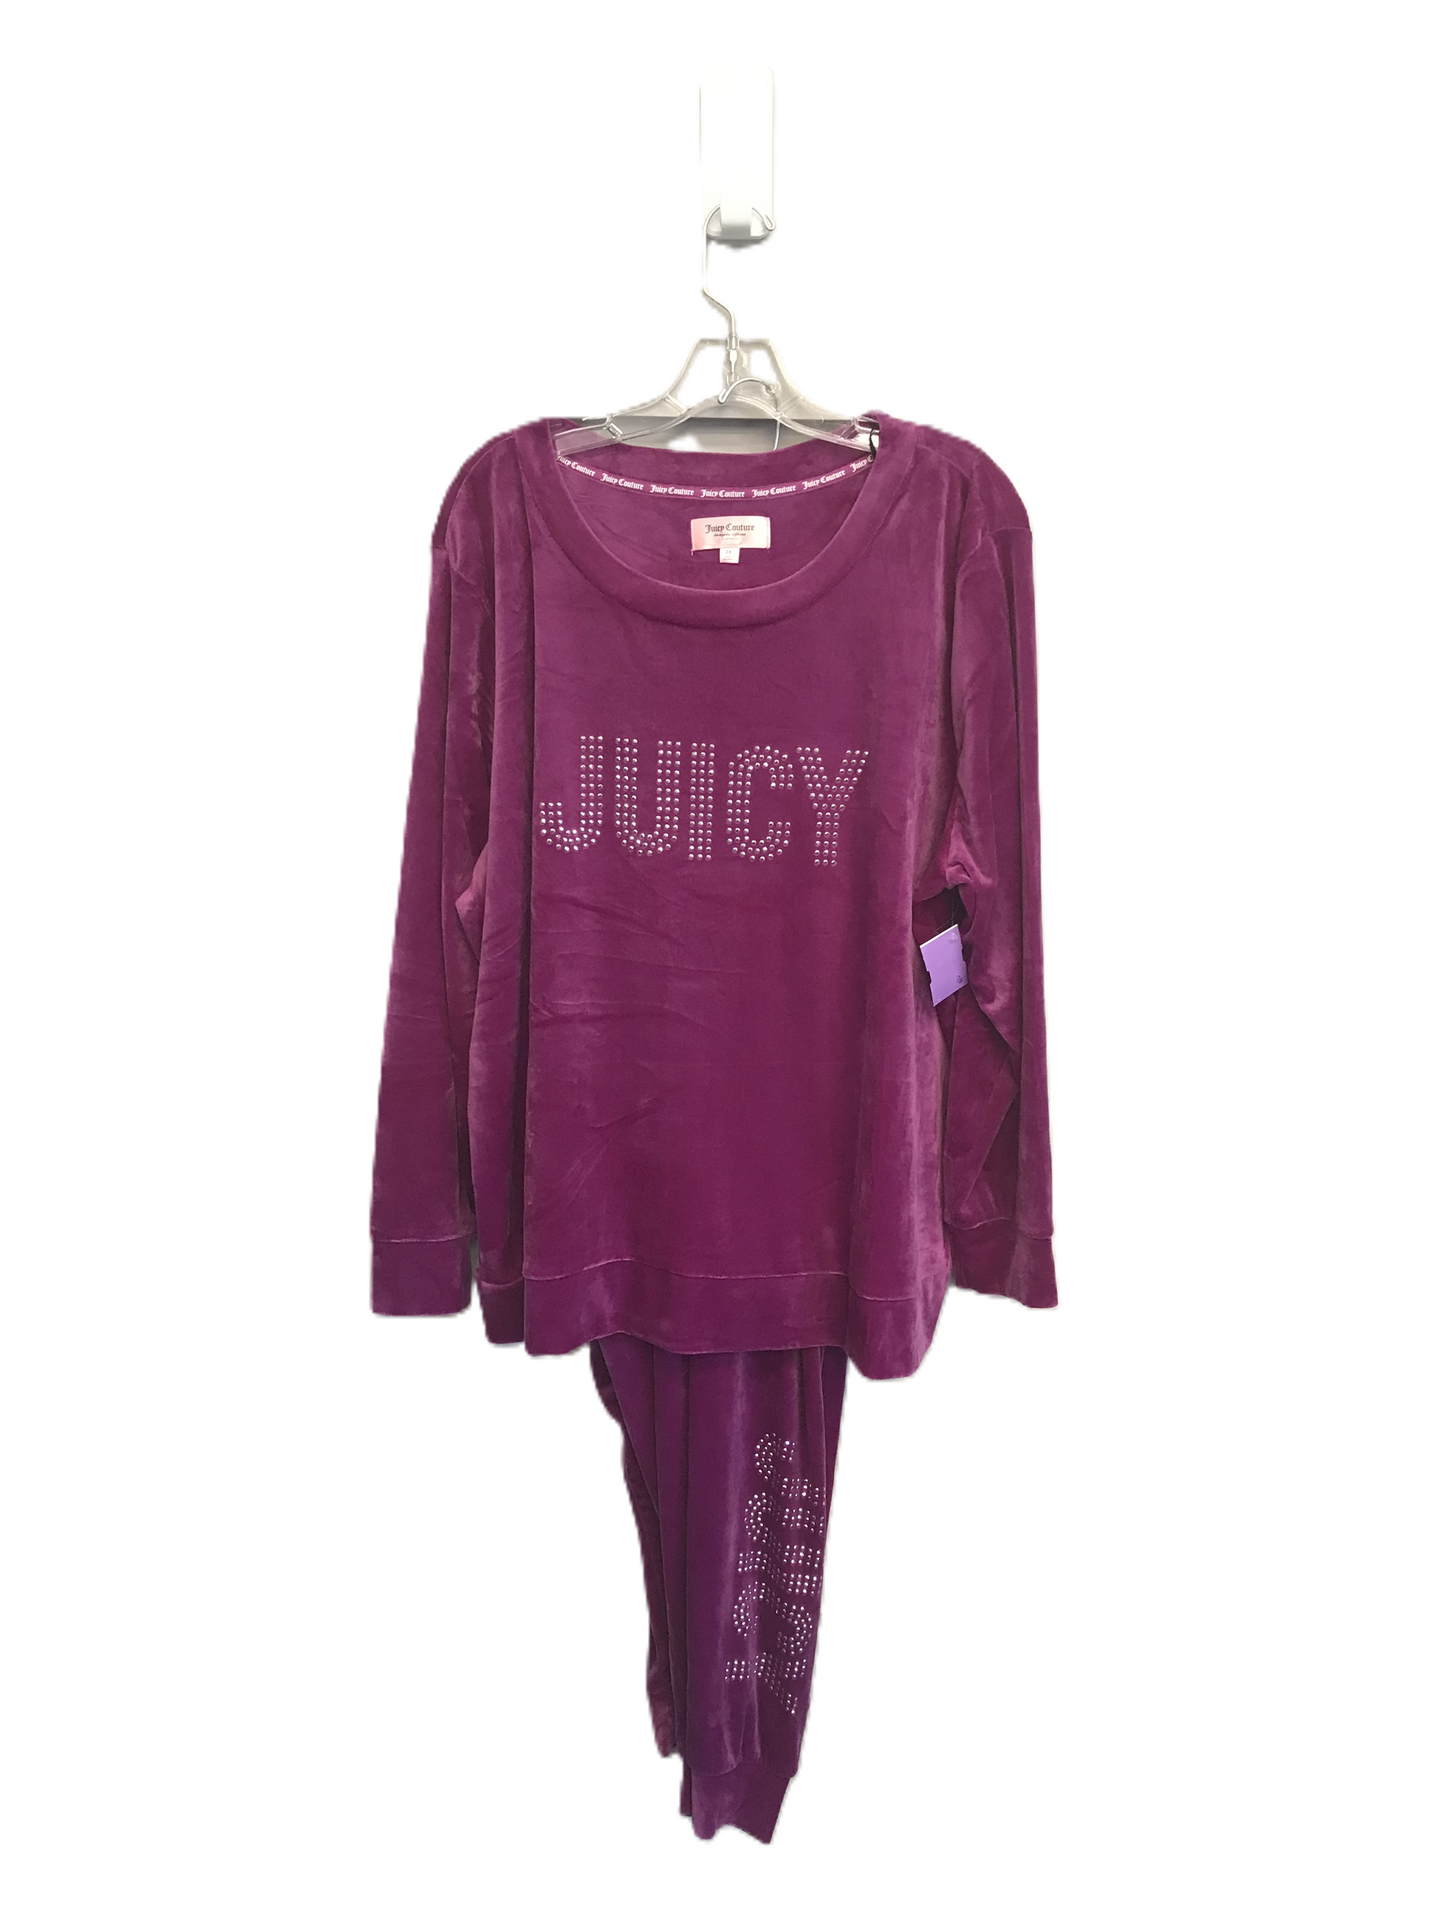 Purple Athletic Pants 2pc By Juicy Couture, Size: 2x